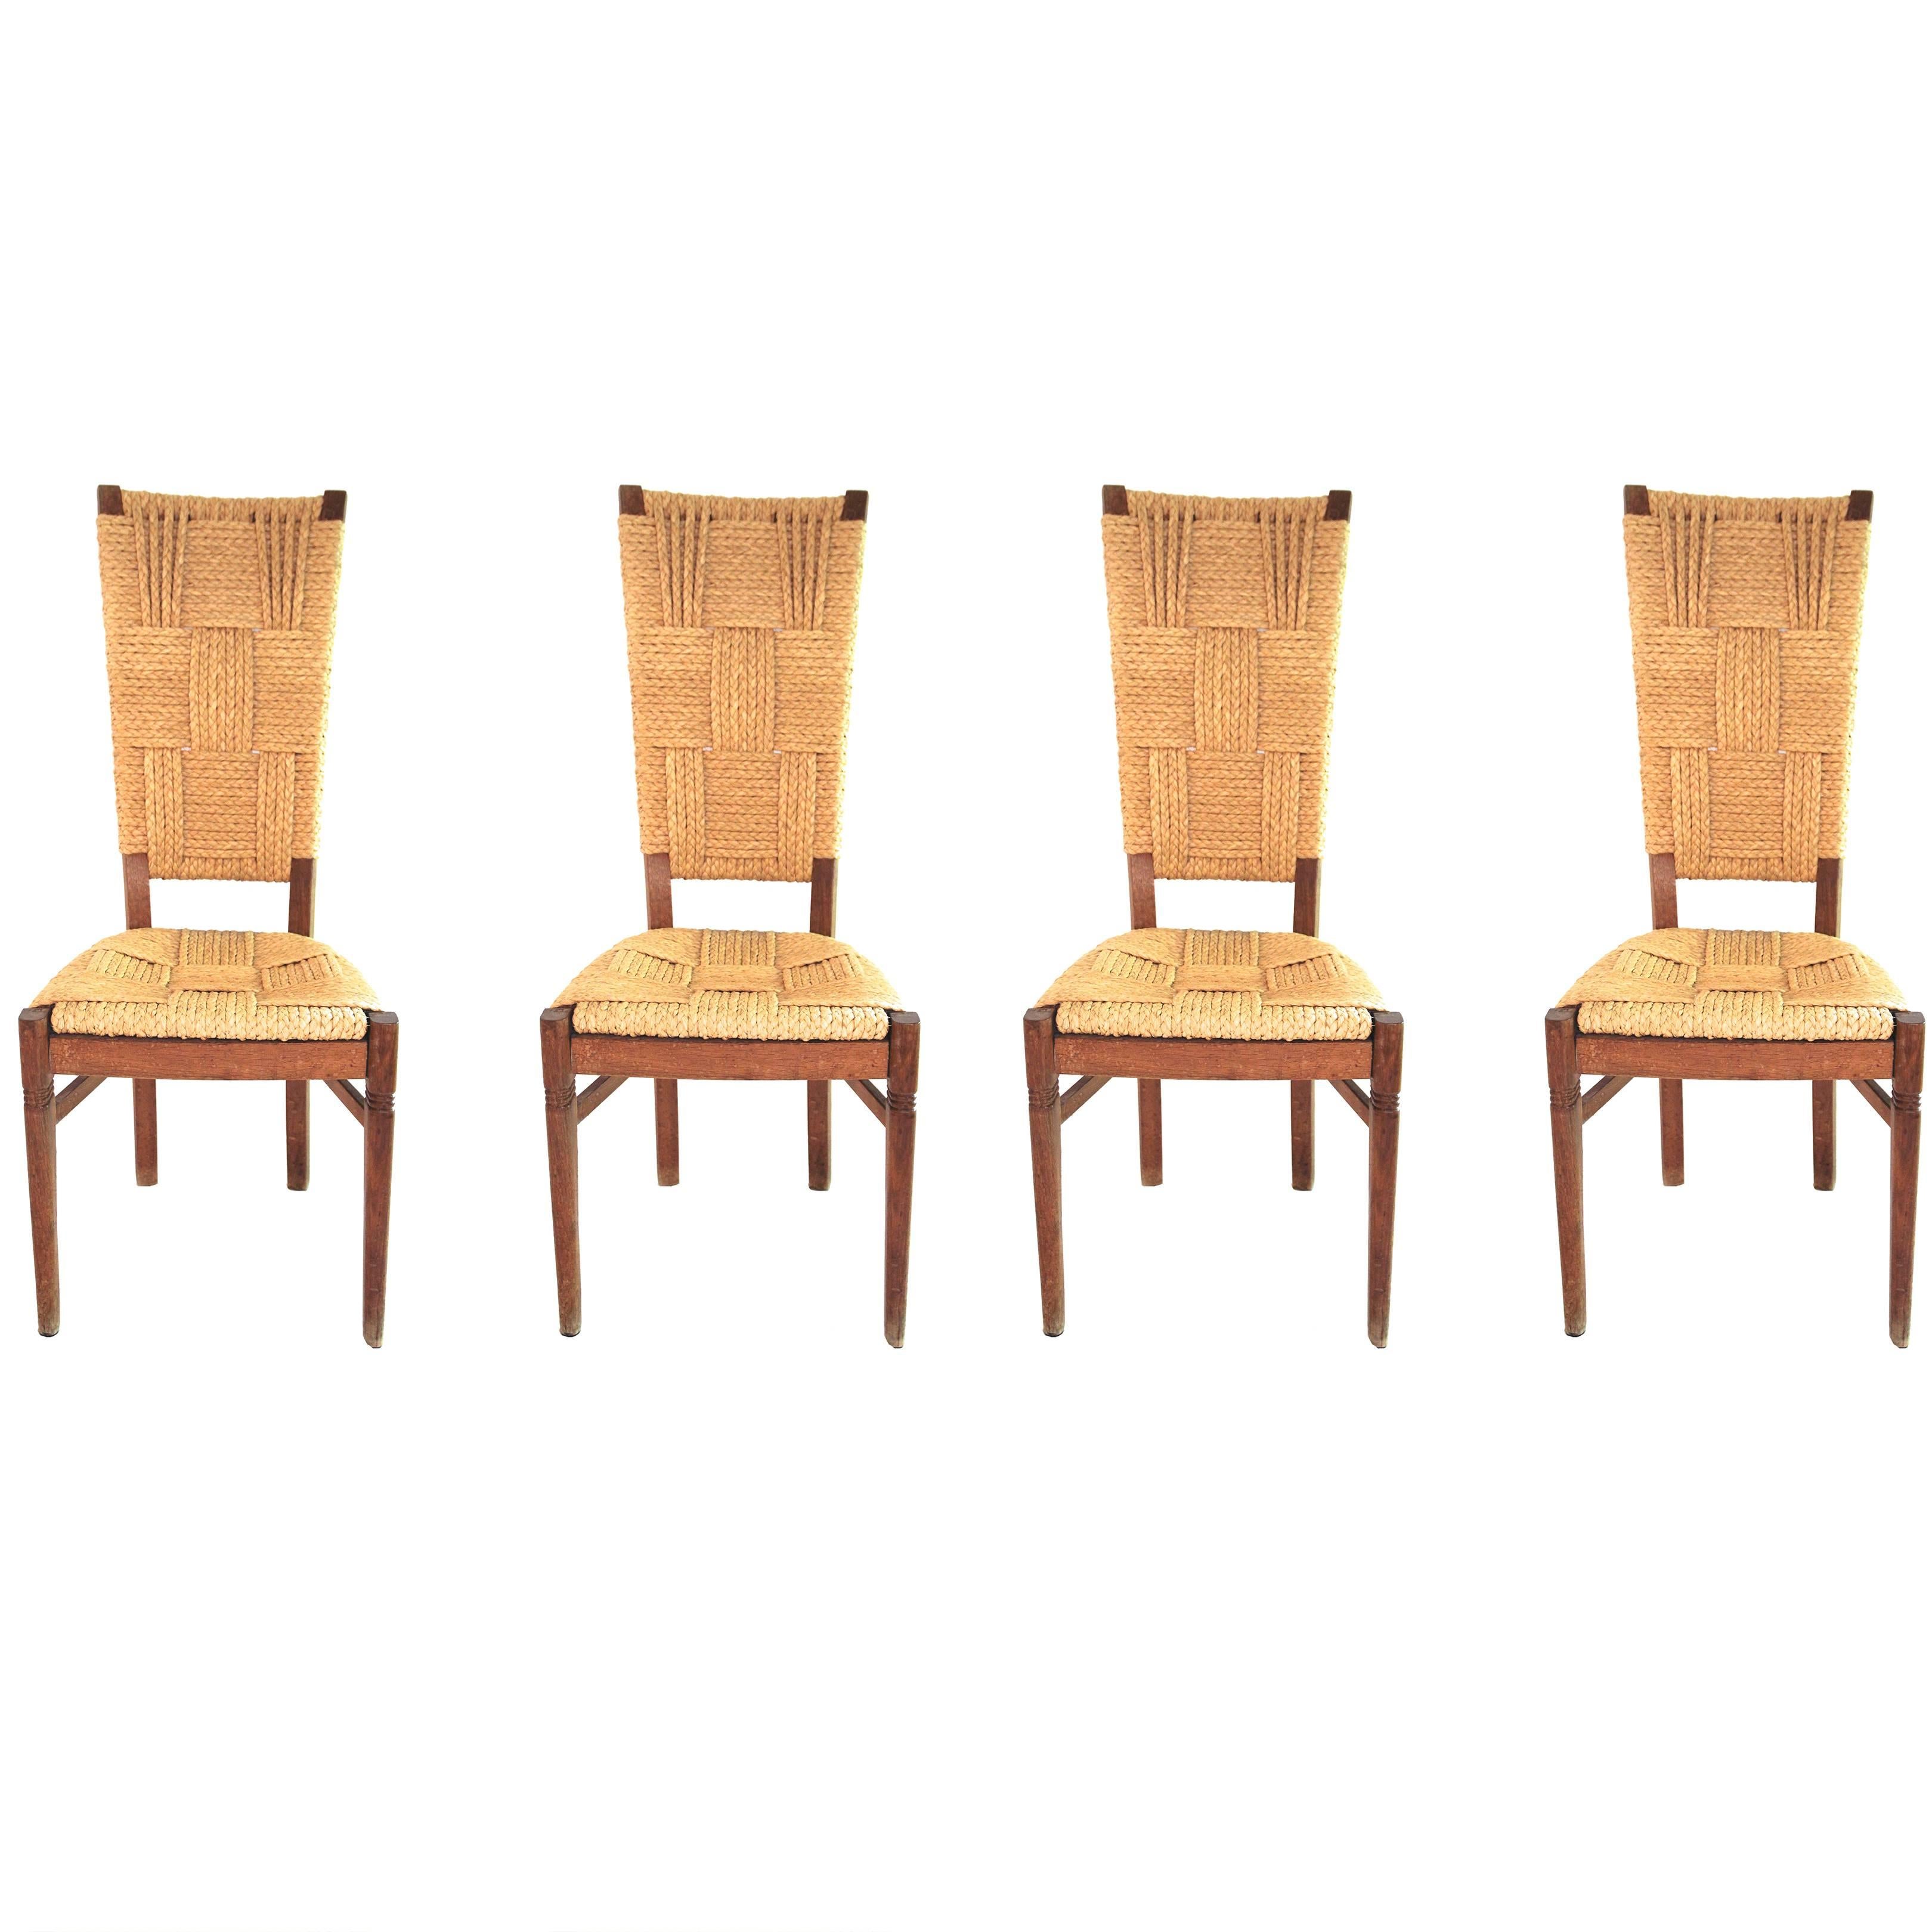 Audoux-Minet, Suite of Four Chairs, Rattan and Wood, circa 1970, France